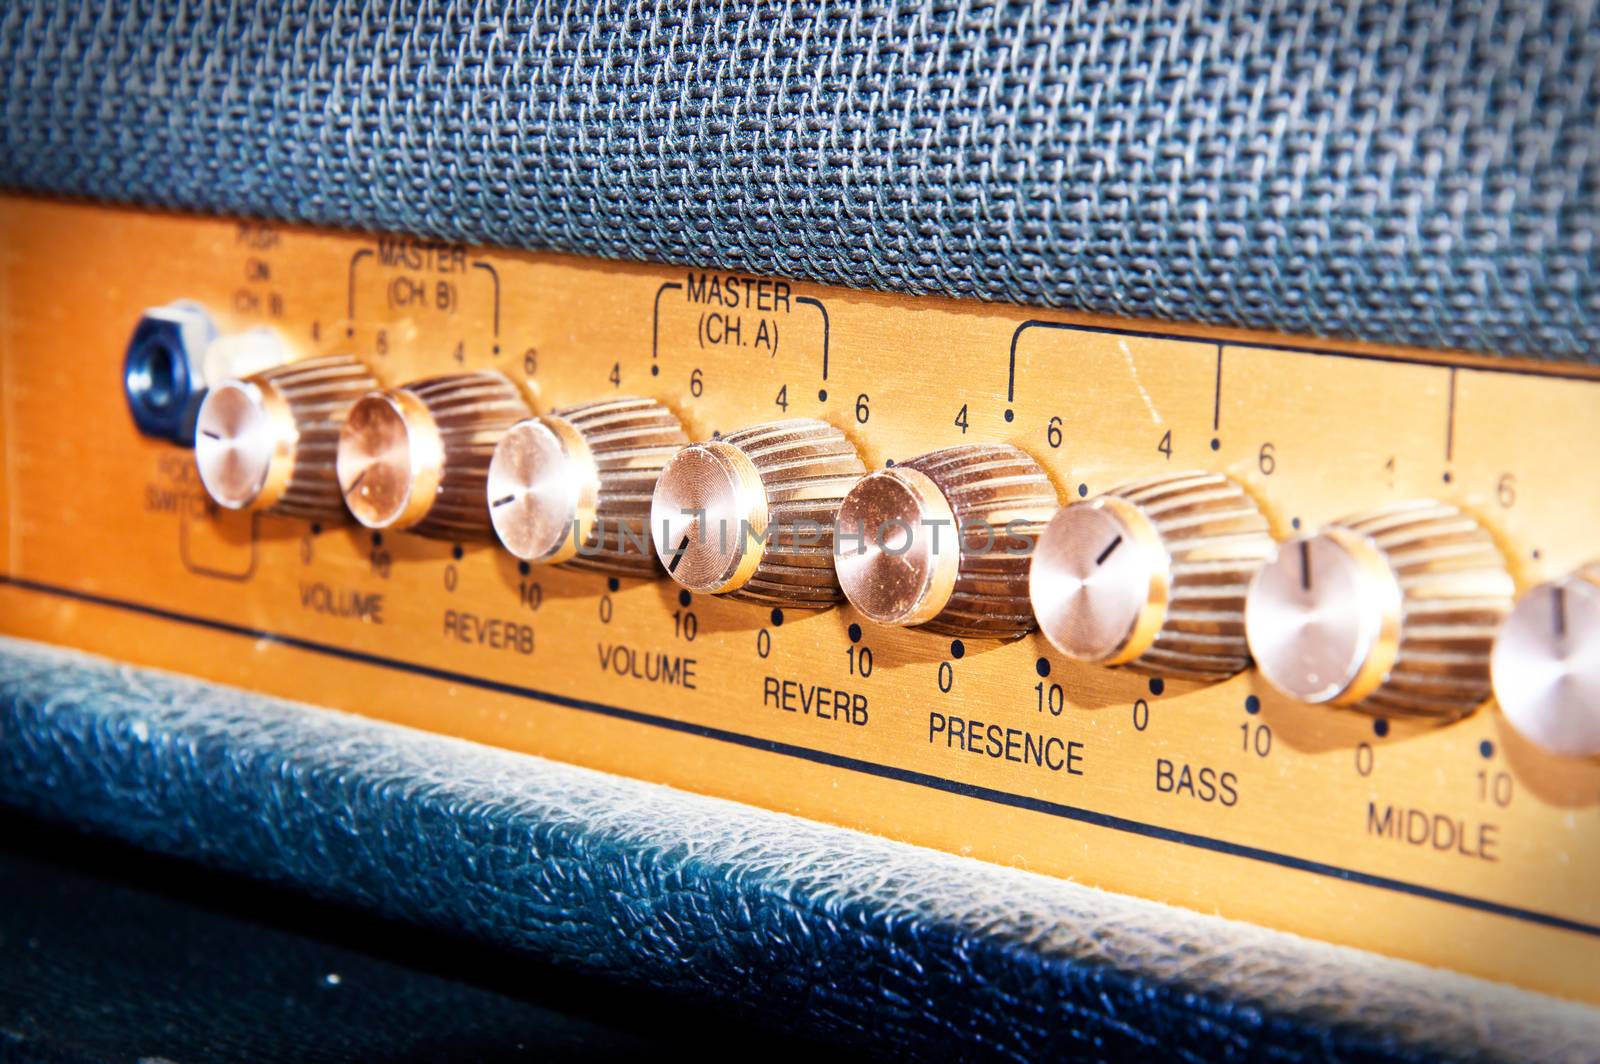 Sound volume controls of vintage guitar amplifier. Music and sound conceptual image.